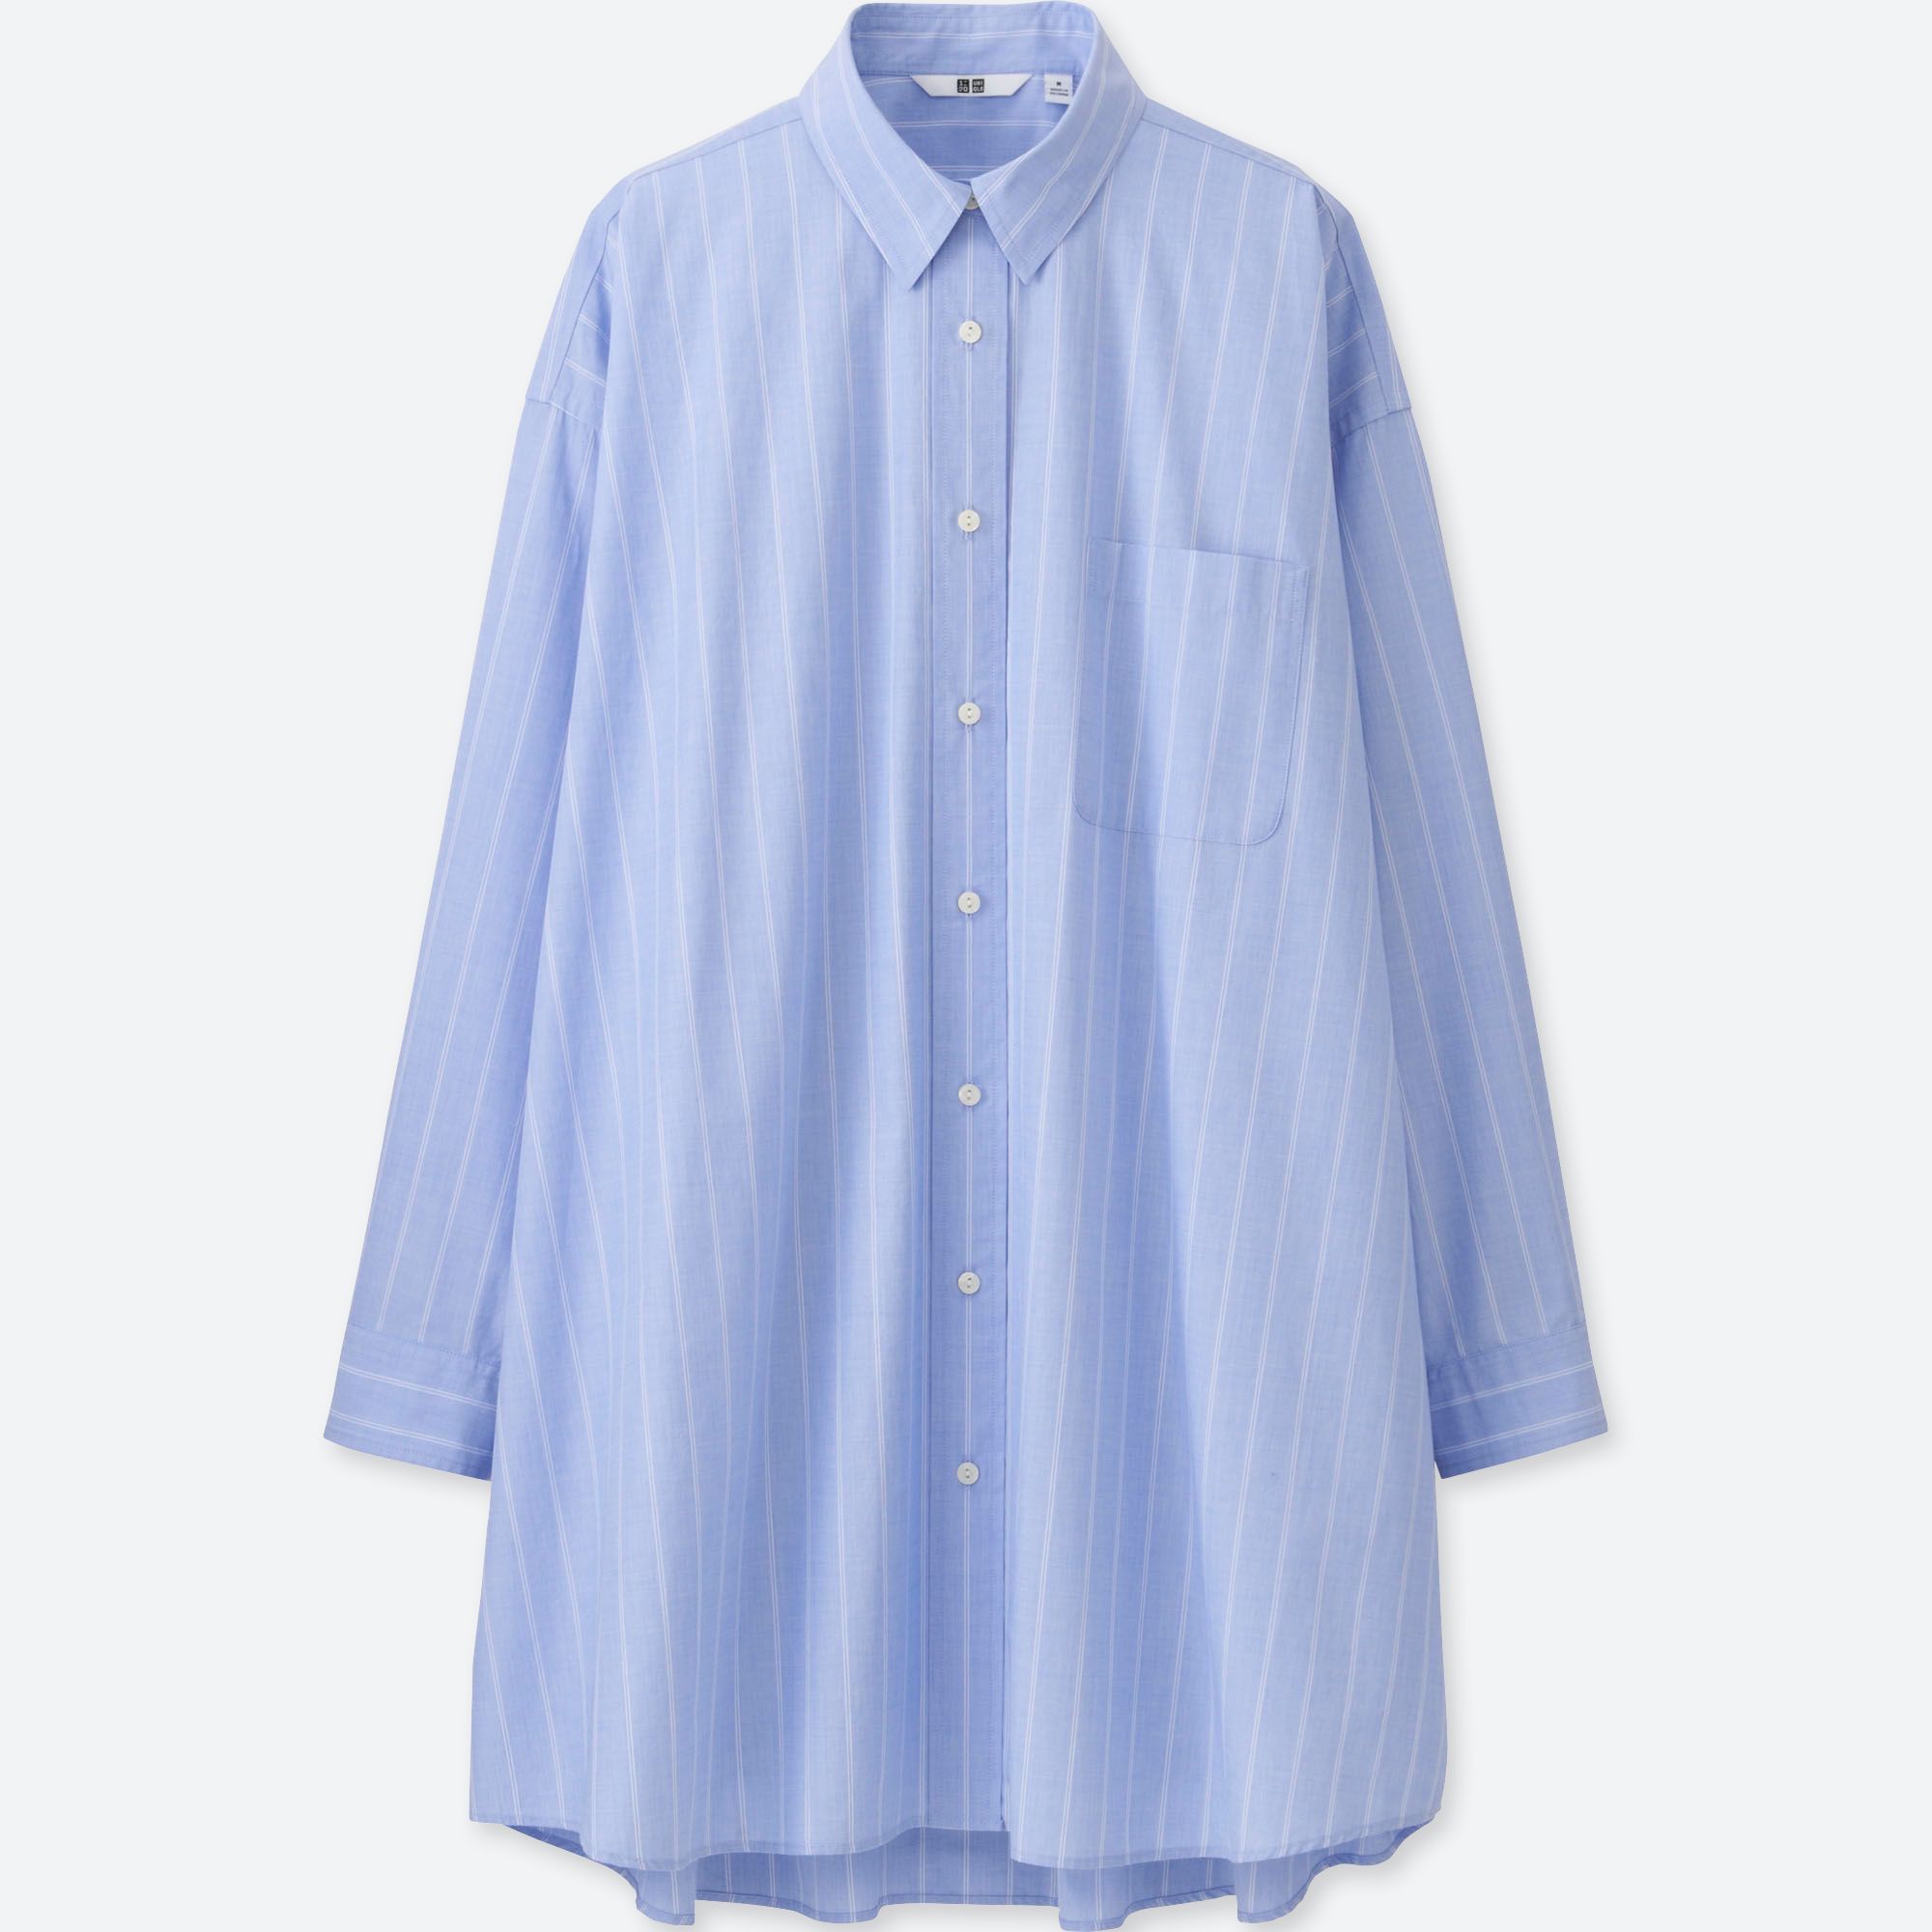 Women's Shirts and Blouses | UNIQLO US